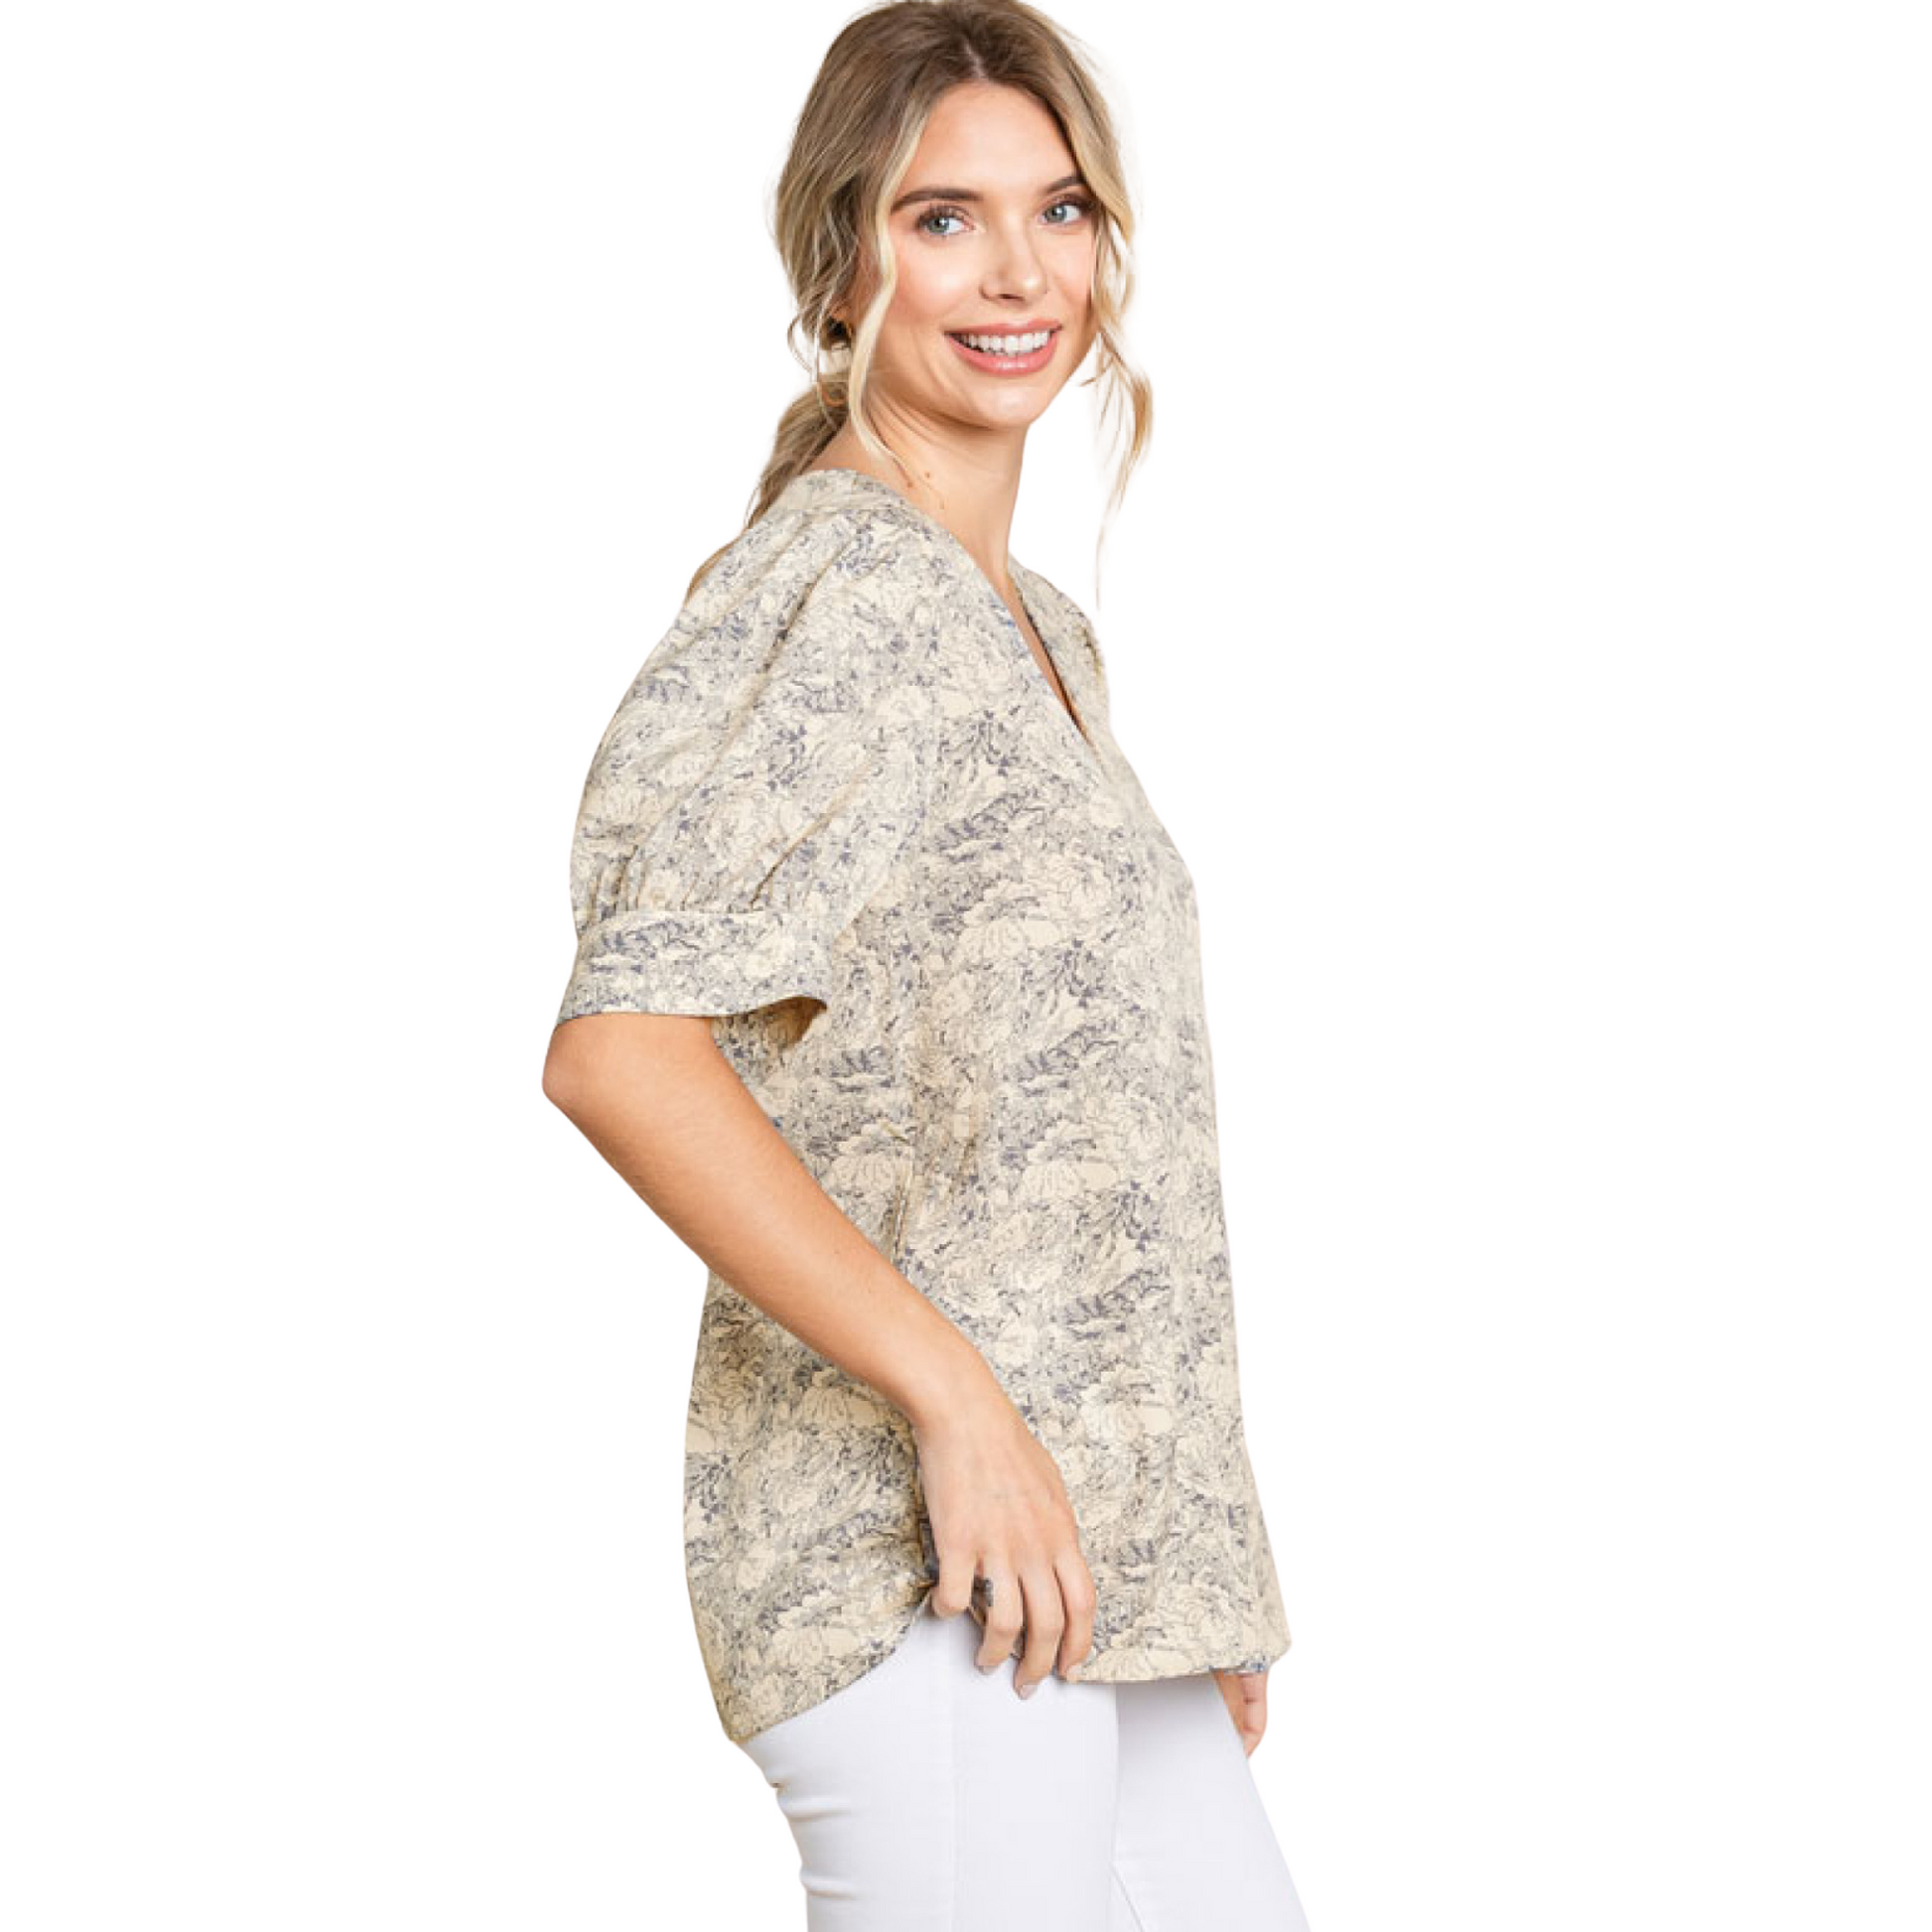 Introduce elegance into your wardrobe with our Jacquard pattern print top. Featuring a flattering V-neckline, short peasant sleeves, and buttoned cuffs, this unlined and non-sheer top is both lightweight and versatile. The natural color adds a touch of sophistication to any outfit.